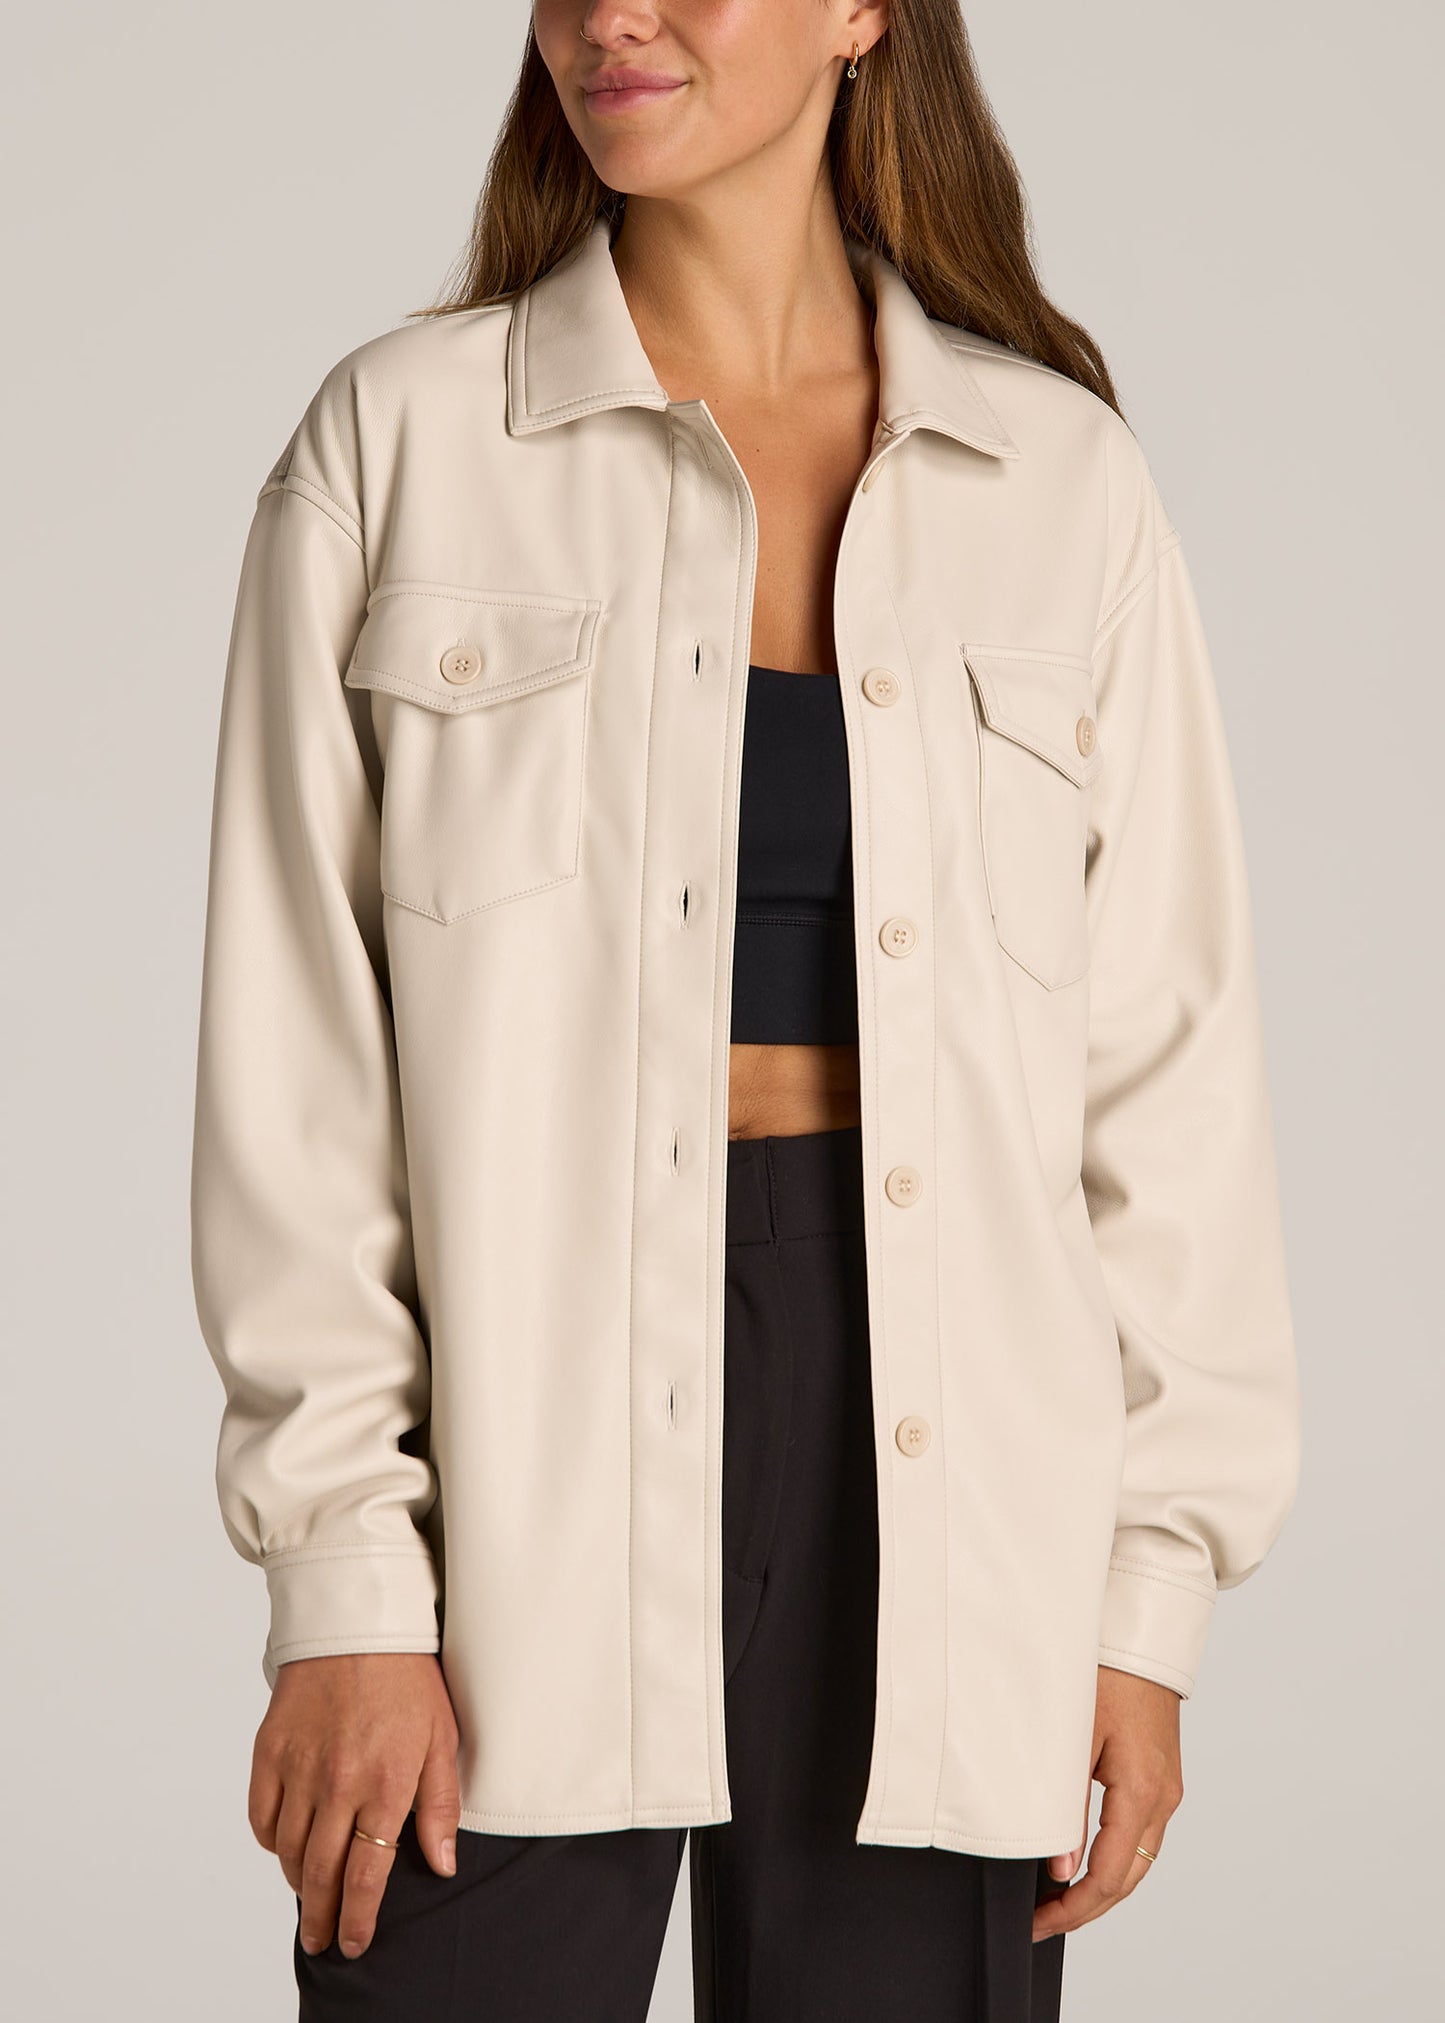 A tall woman wearing American Tall's Faux Leather Shirt Jacket with Chest Pockets in the color Vanilla Latte.